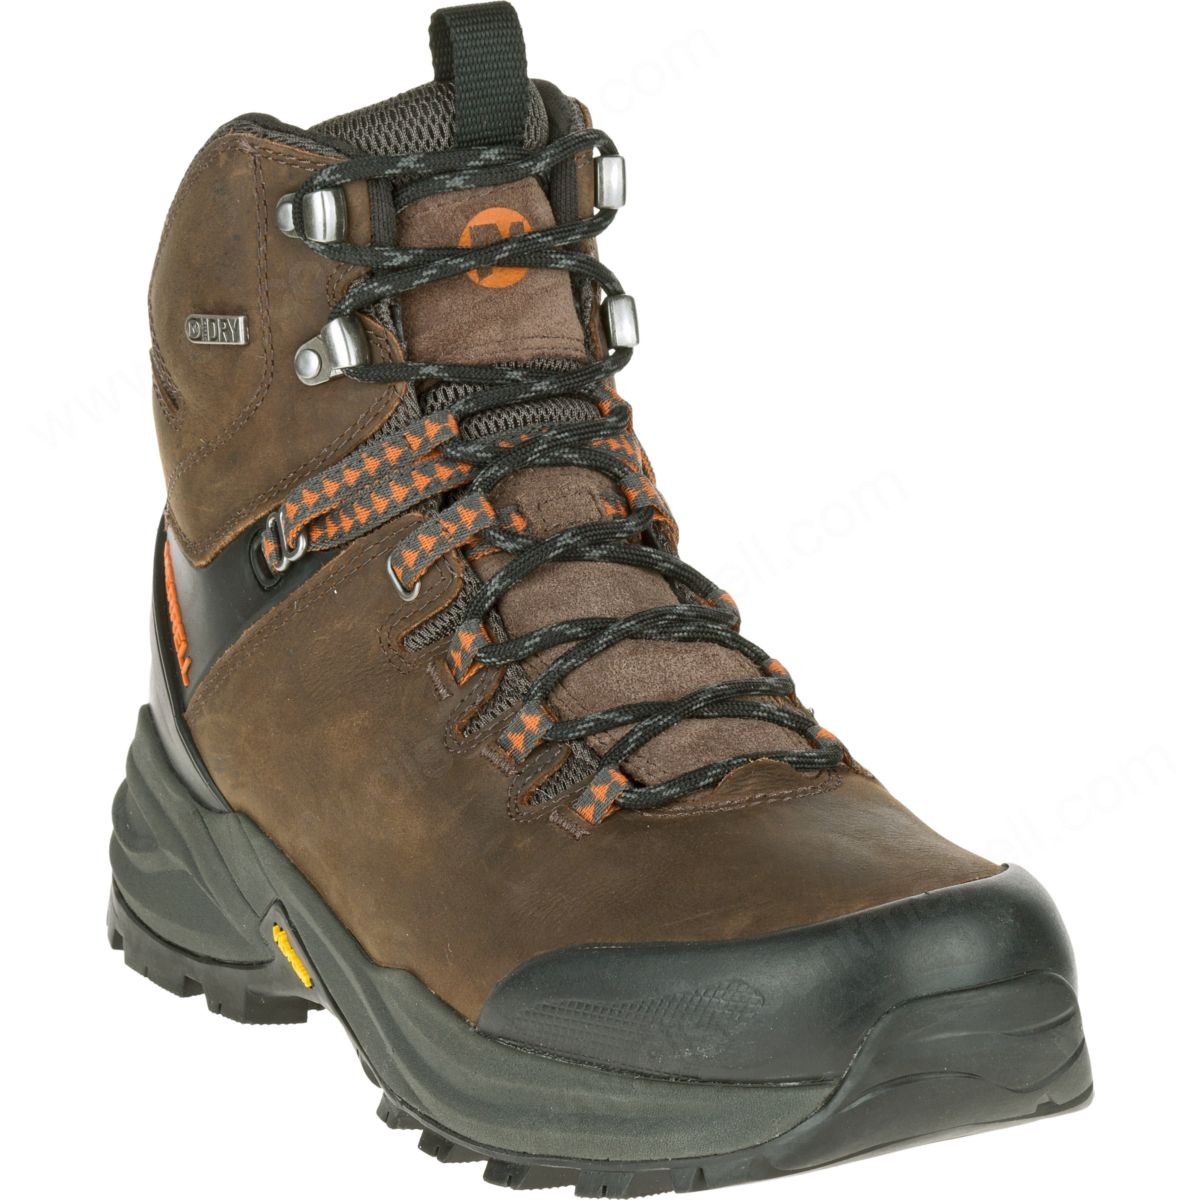 Merrell Man's Phaserbound Waterproof Clay - -3